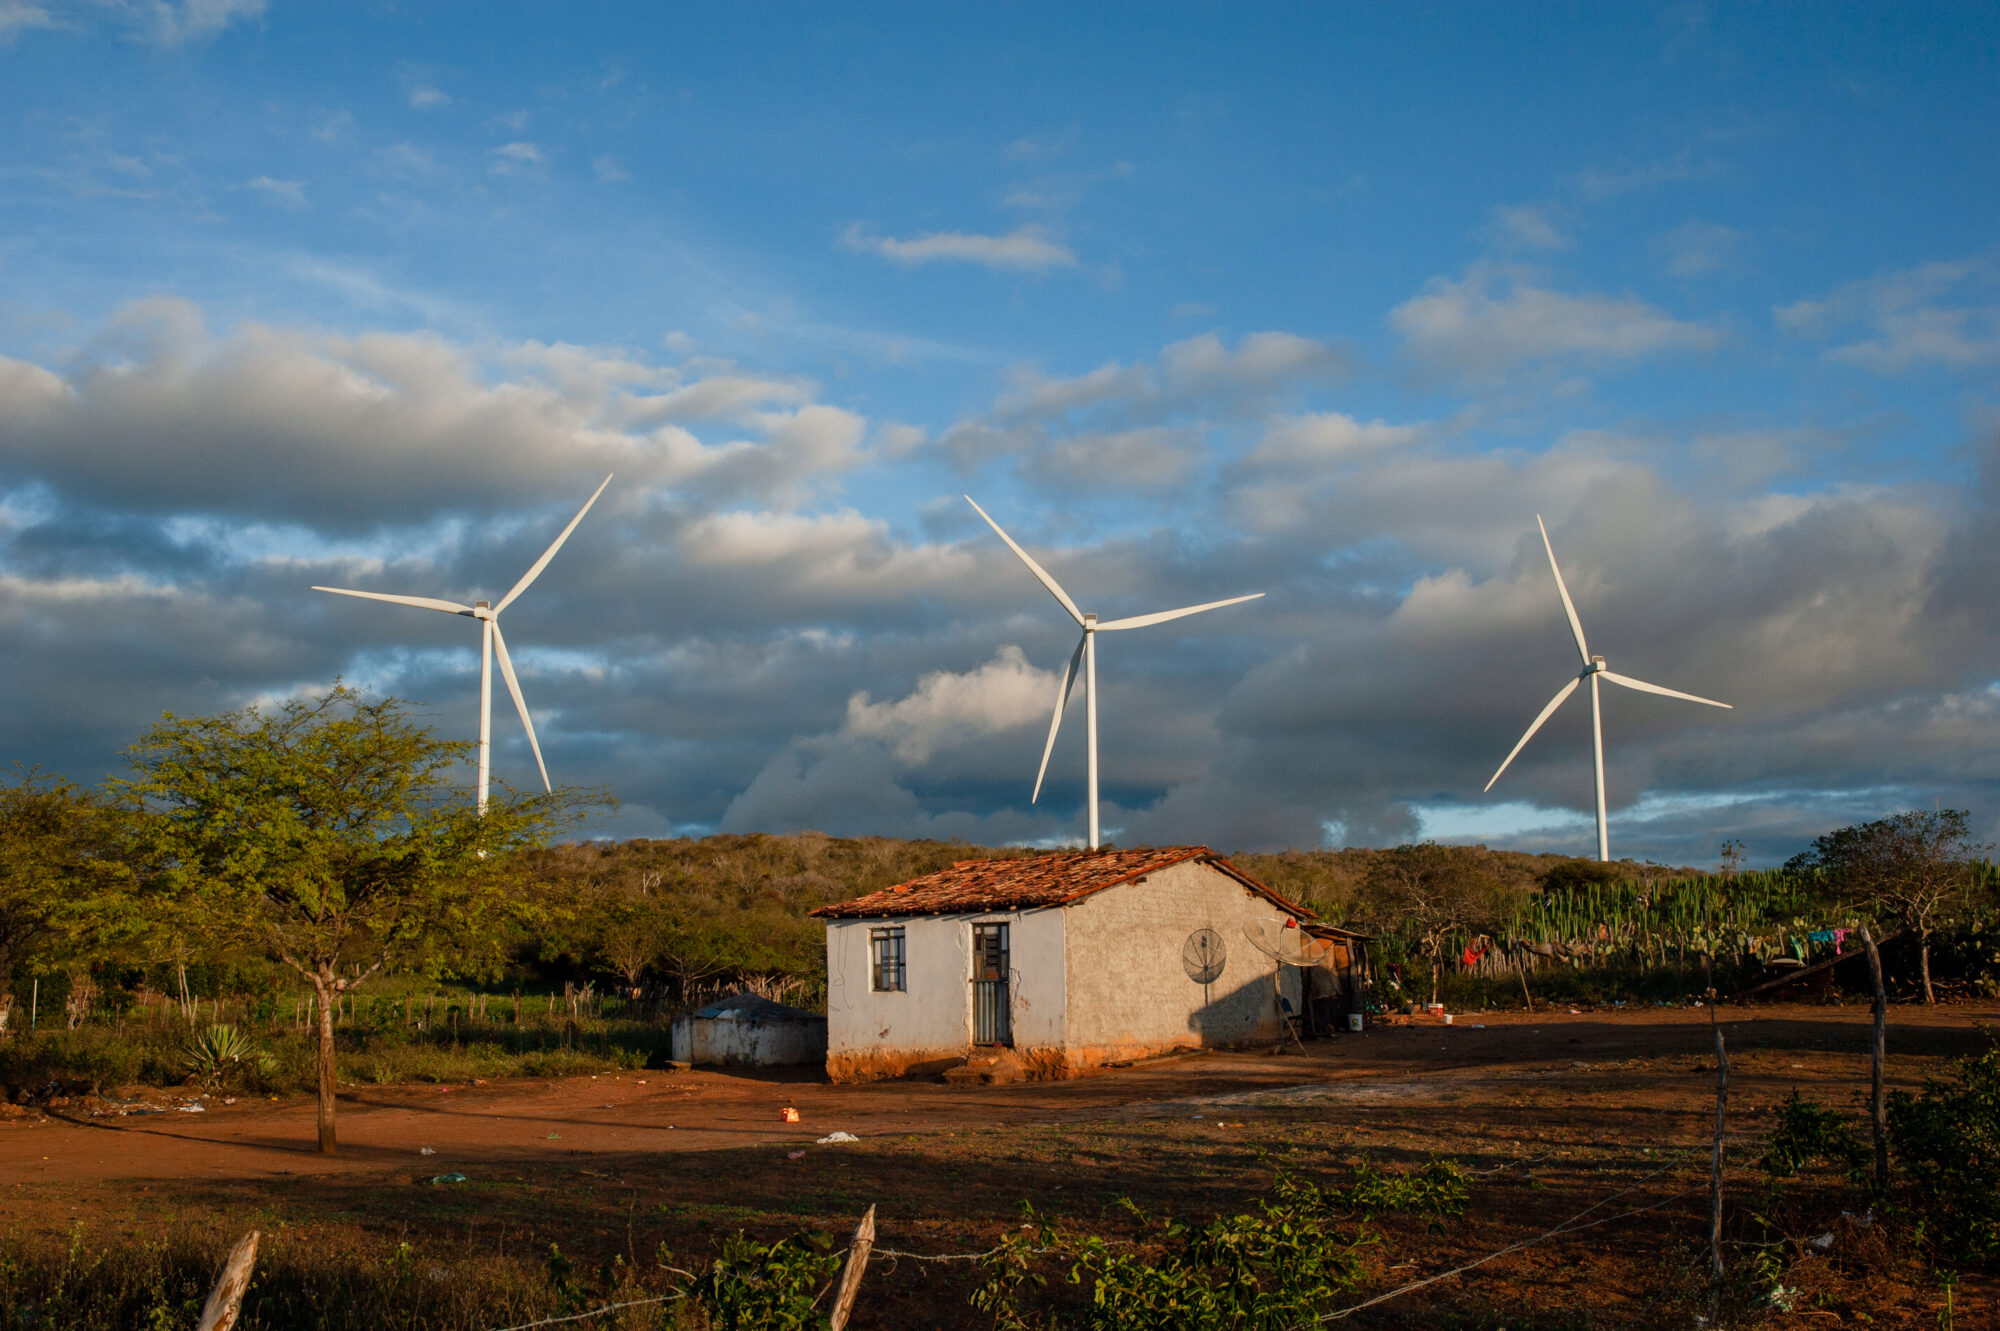 <p><span style="font-weight: 400;">A house near the Folha Larga Norte wind farm in Bahia state, Brazil. Wind power plants are advancing in the region, but conflicts with communities are increasing amid land disputes (Image: Camilo Lobo / Diálogo Chino) </span></p>